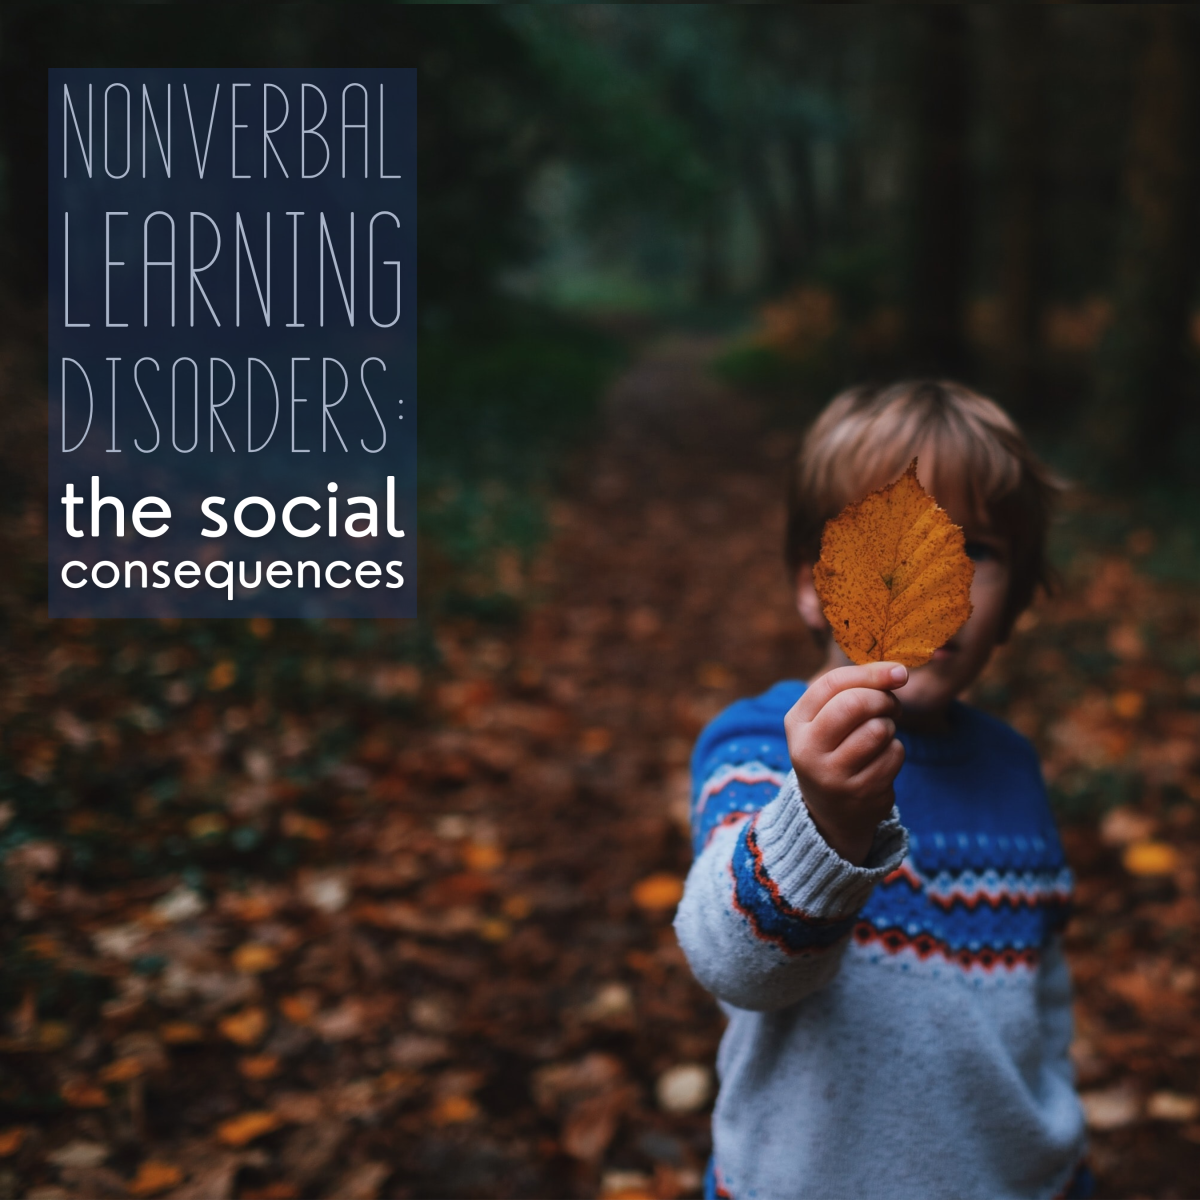 The social consequences of nonverbal learning disorders (NVLD).